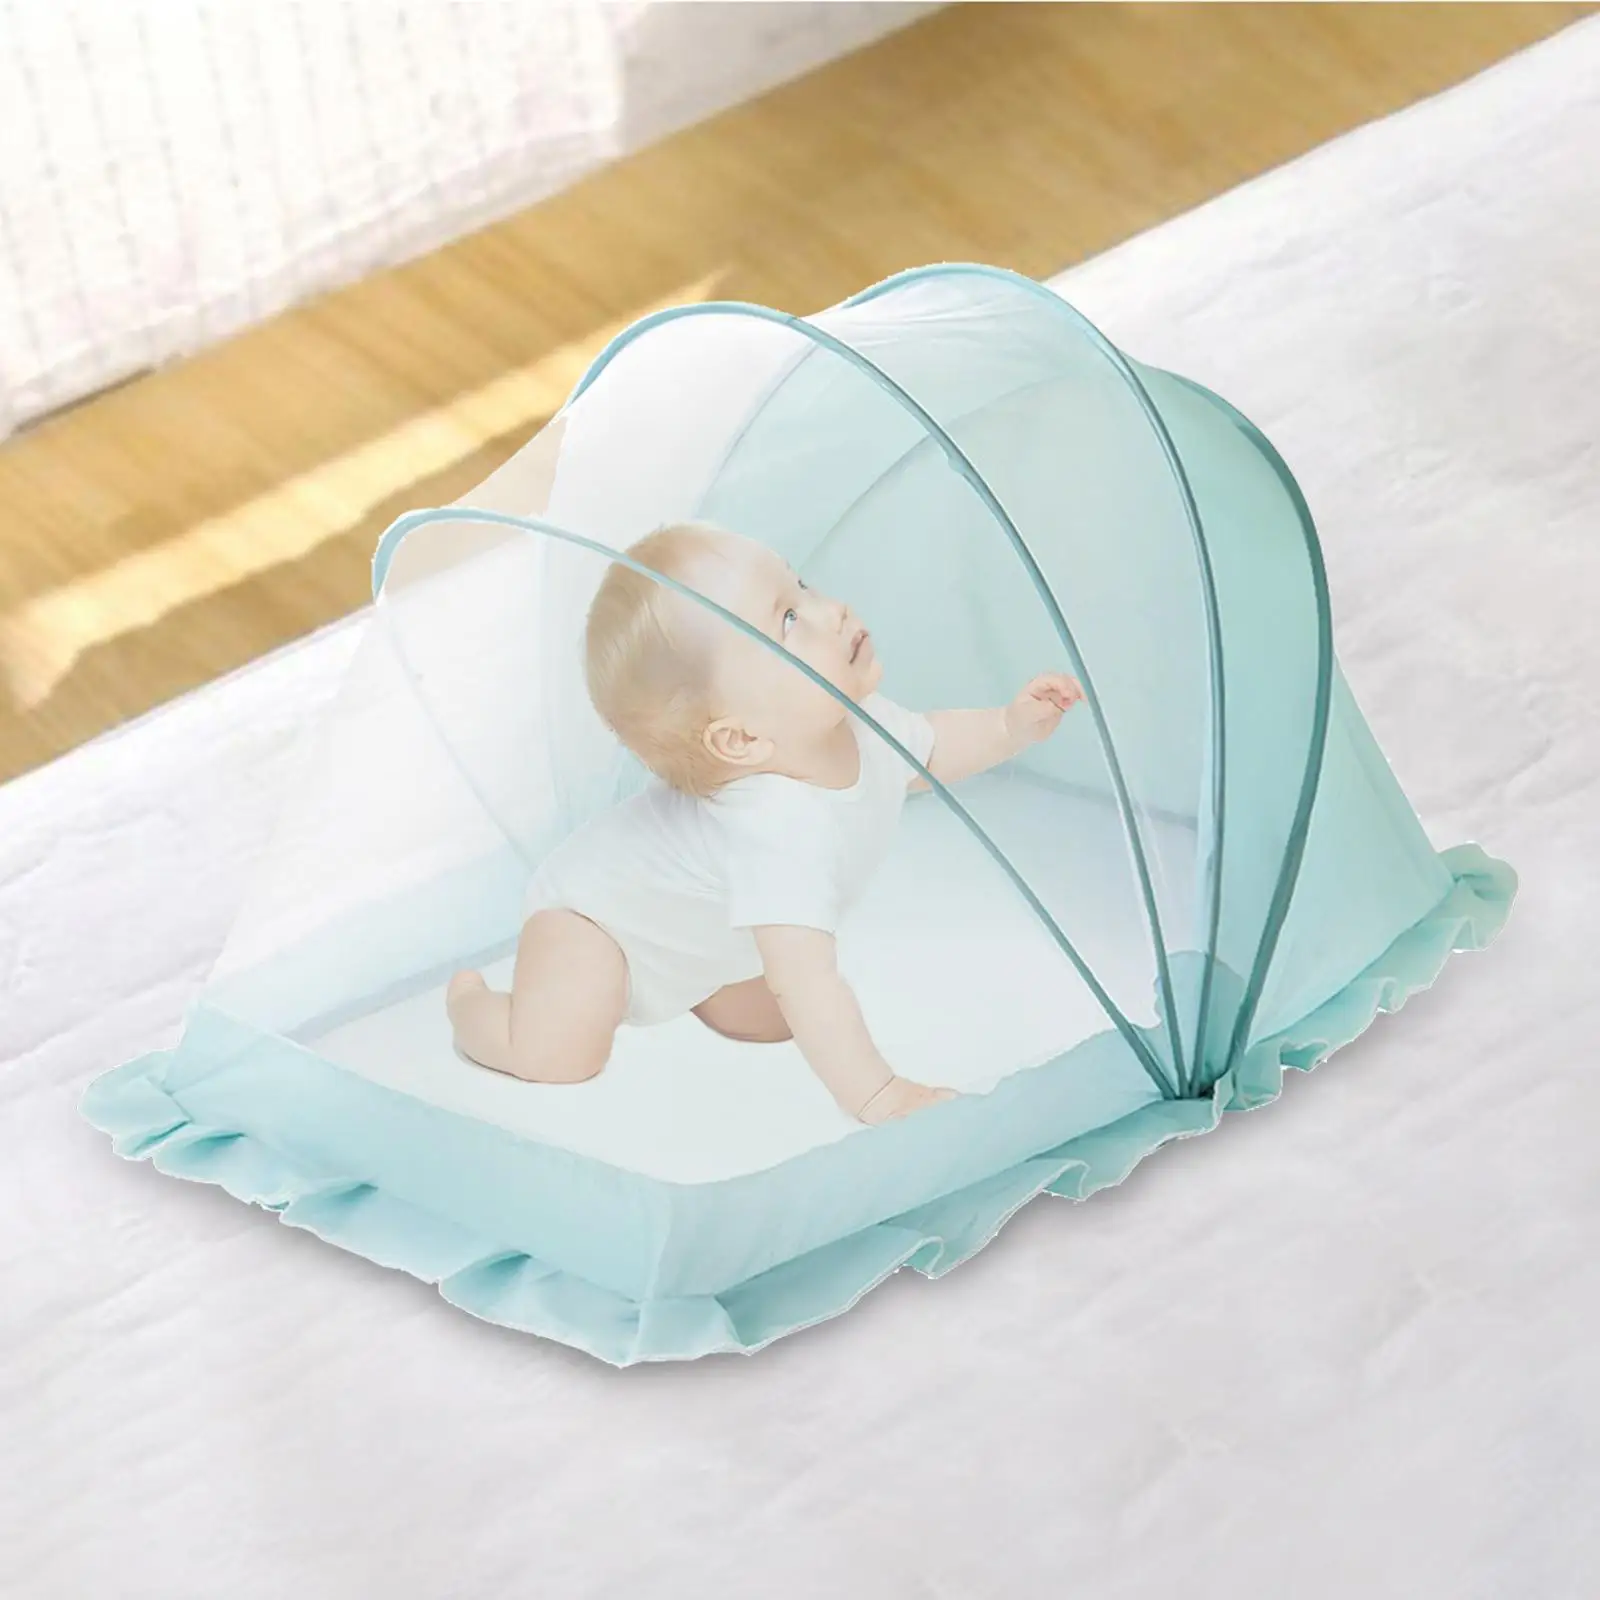 Crib Netting Cover Easy to Use Comfortable Lightweight Washable Light Shade Cover Multifunction for Children Toddler Accessories